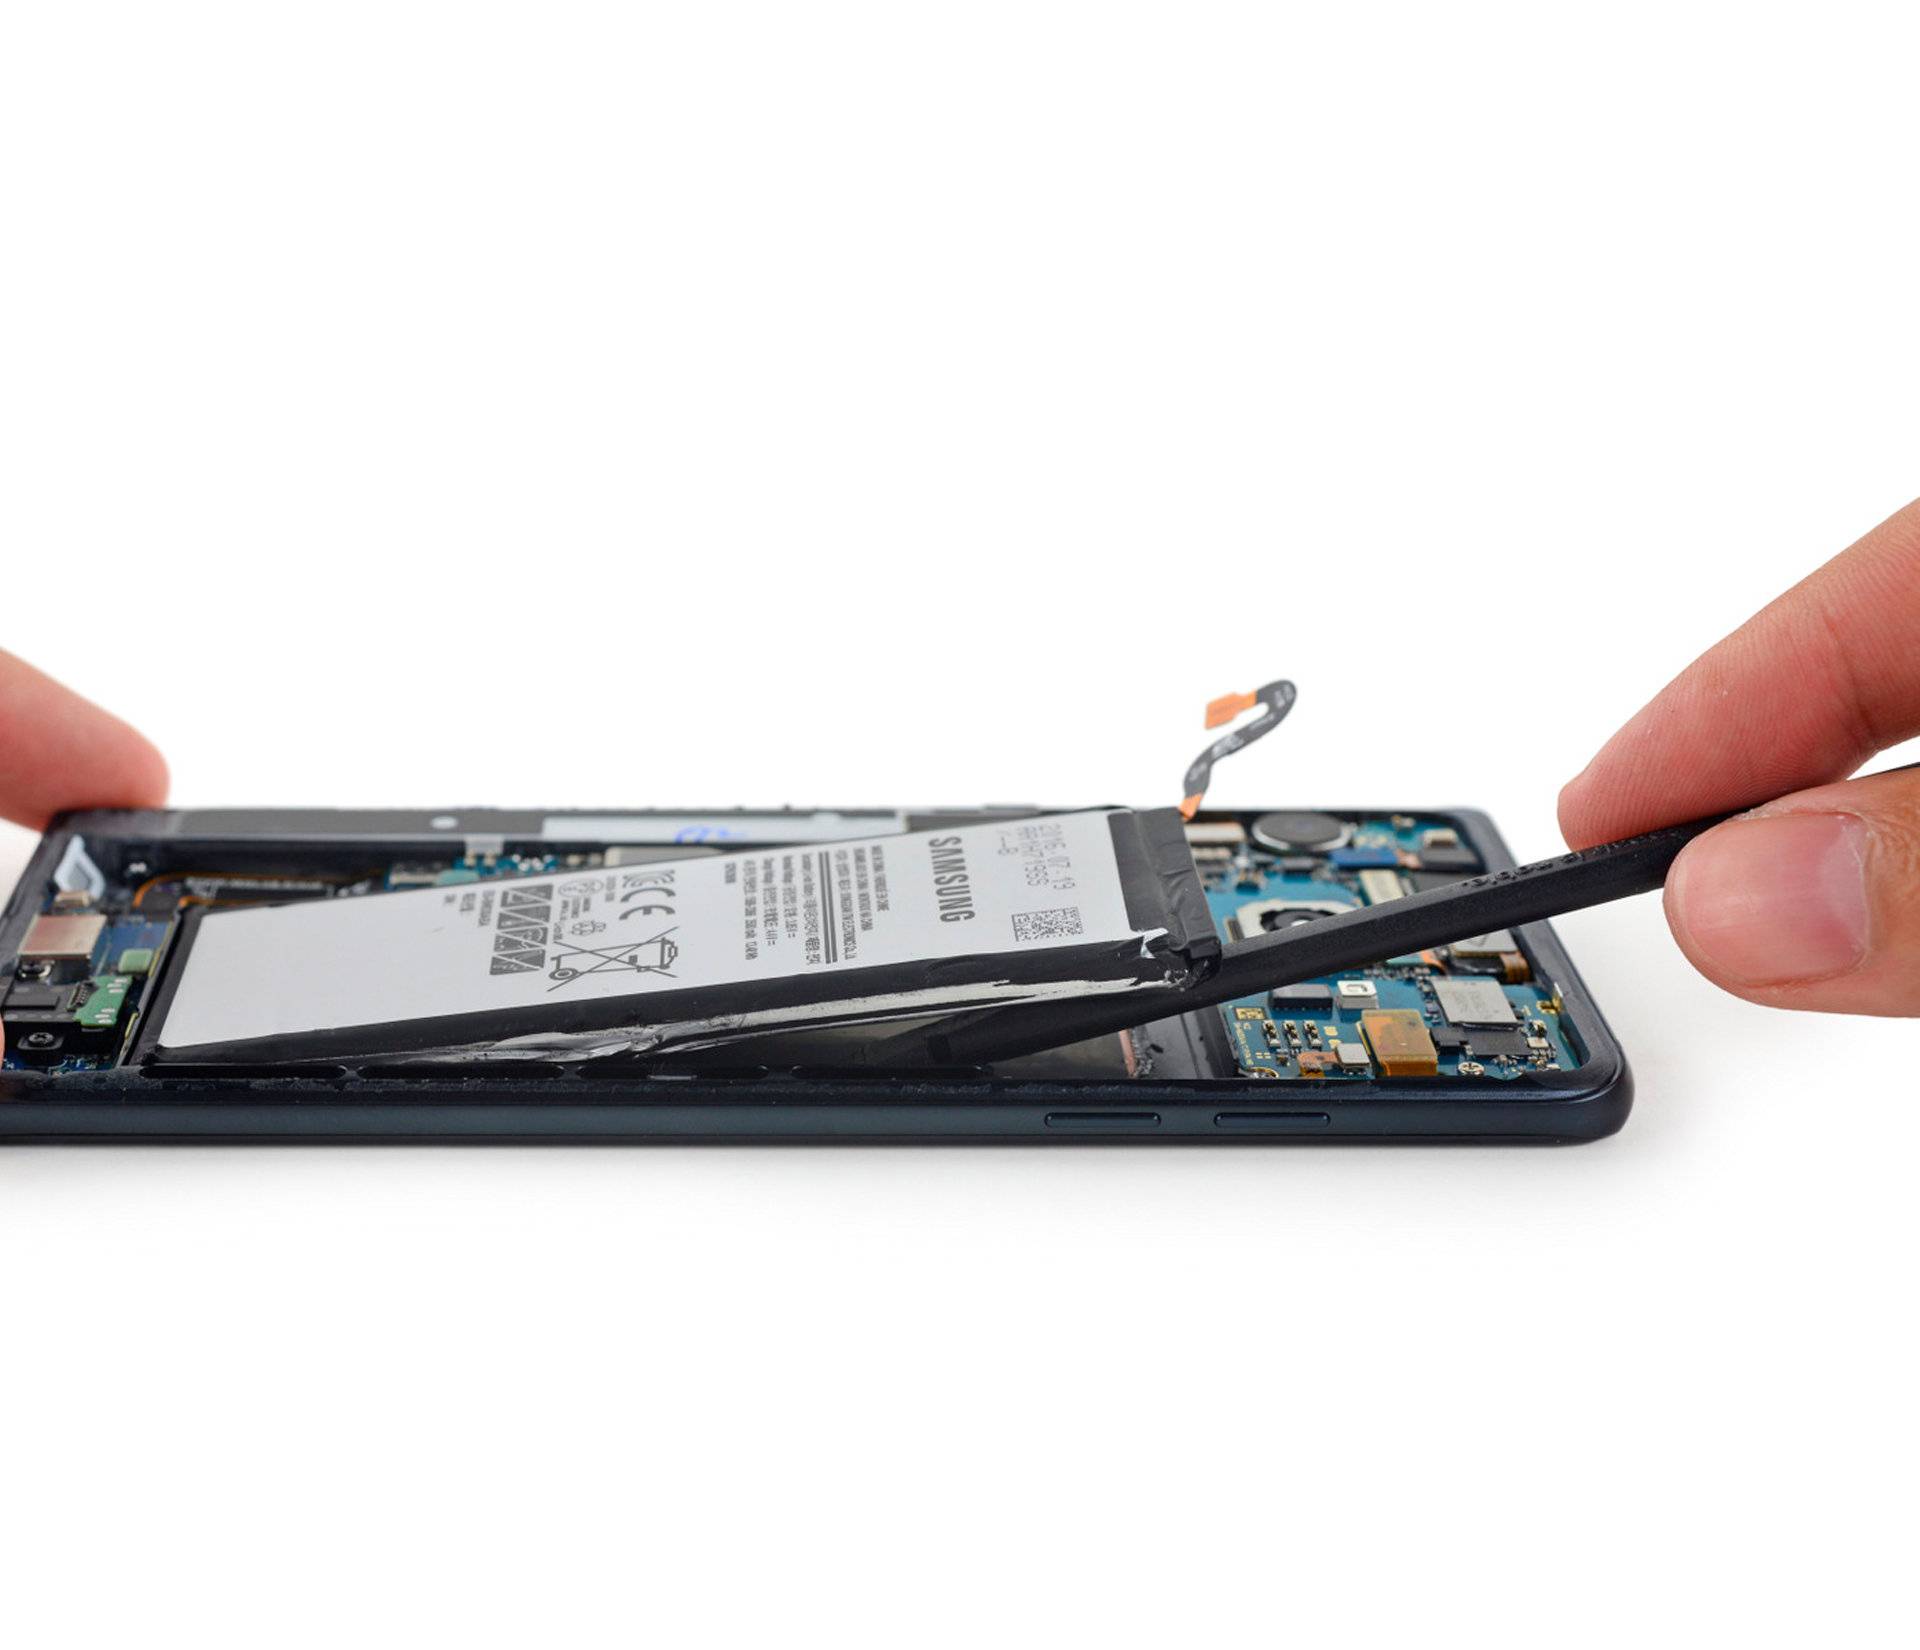 Samsung Galaxy Note 7 smartphone battery is removed during a iFixit's teardown of the phone